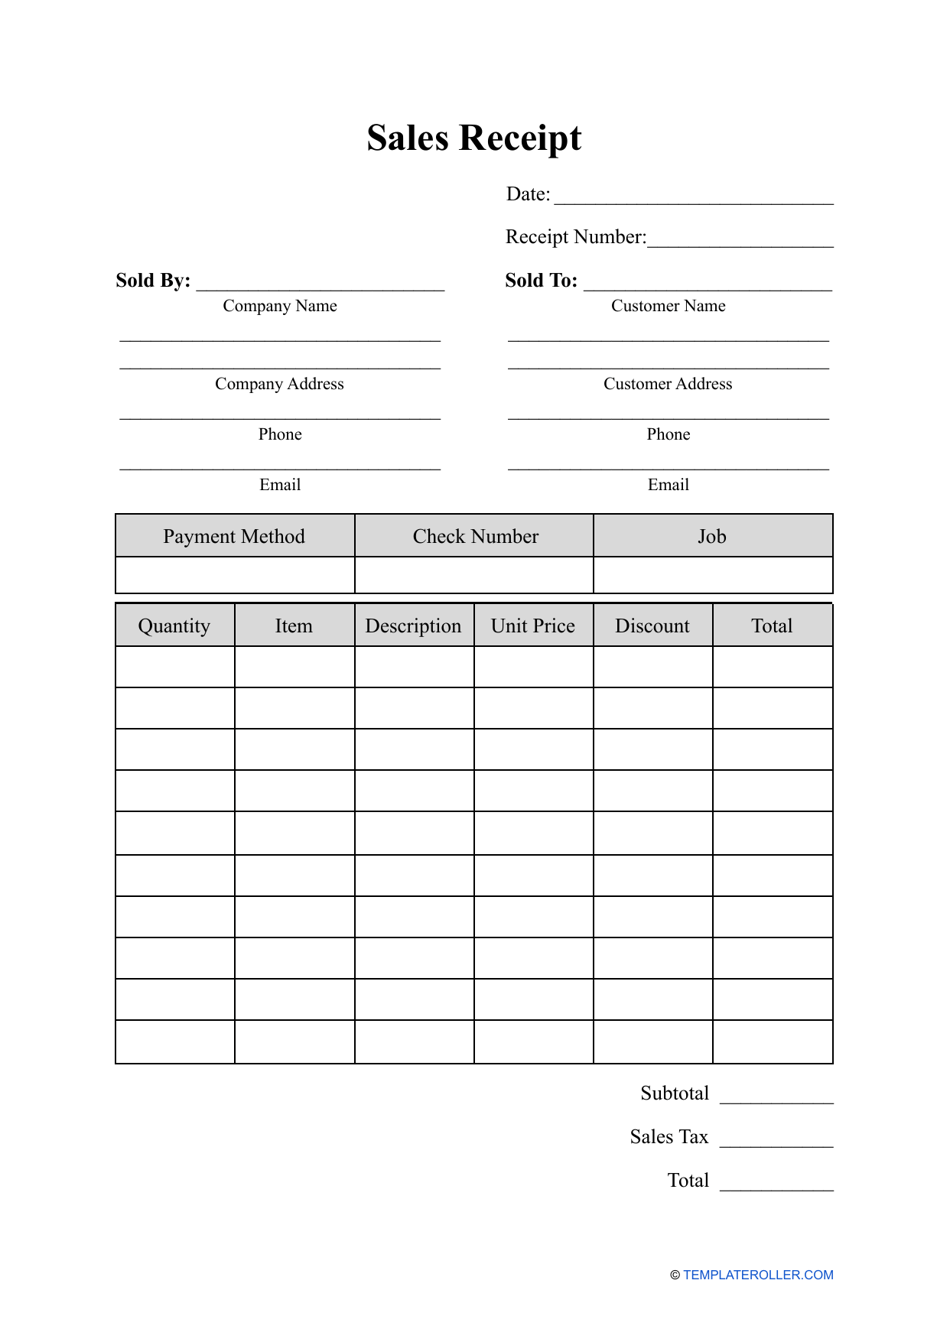 free-receipt-templates-samples-pdf-word-eforms-four-free-receipt-forms-for-cash-payments